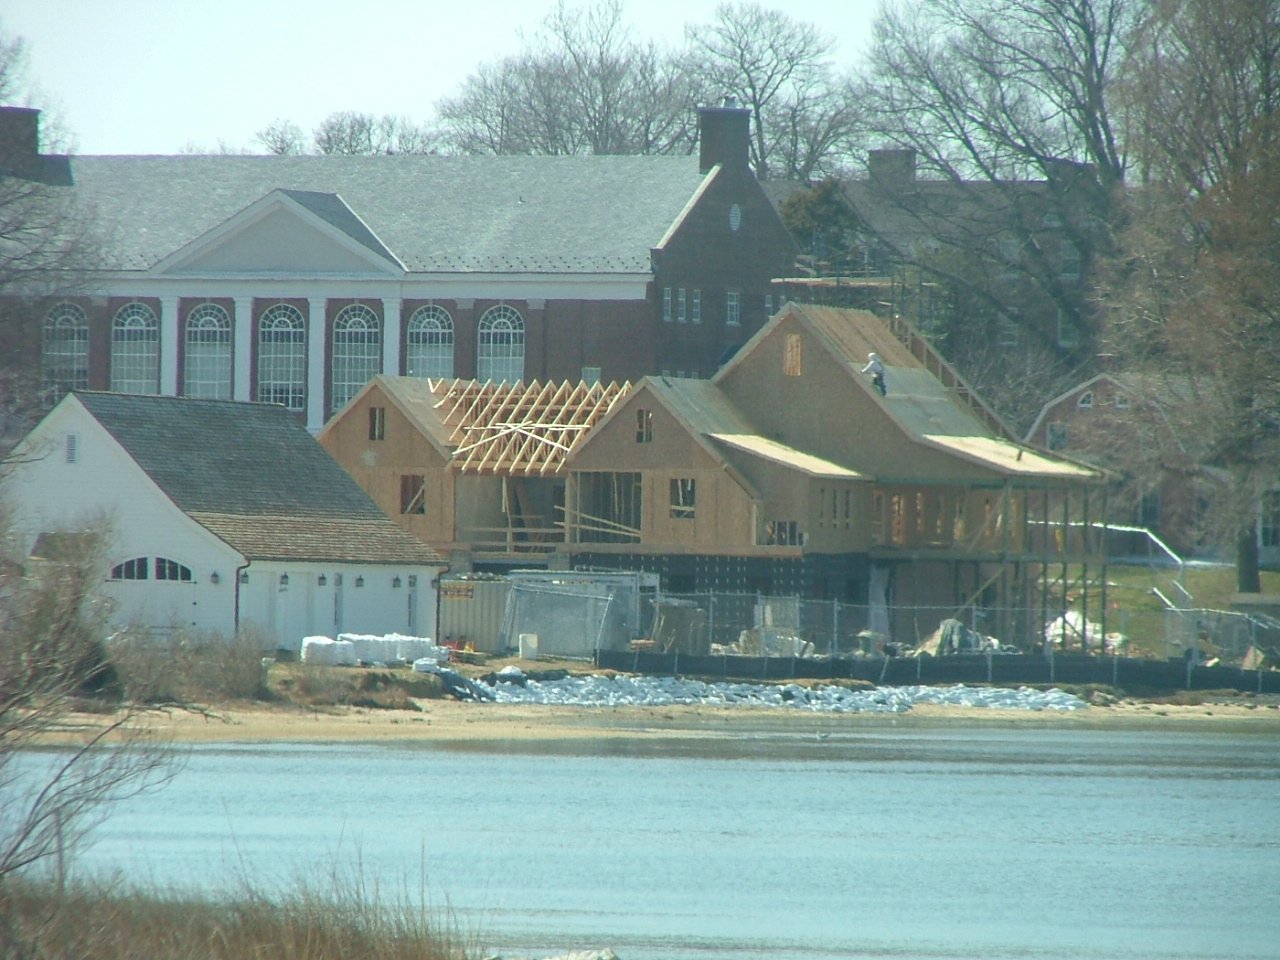 Maggies Erection The Yacht Club, three stories high, being built next to the new boathouse and obstructing the view of the river. The construction violated the clean water rules  and Critical Area laws, but since the violations were done by a state agency, no one was dragged into court.  THE CHESAPEAKE TODAY photo